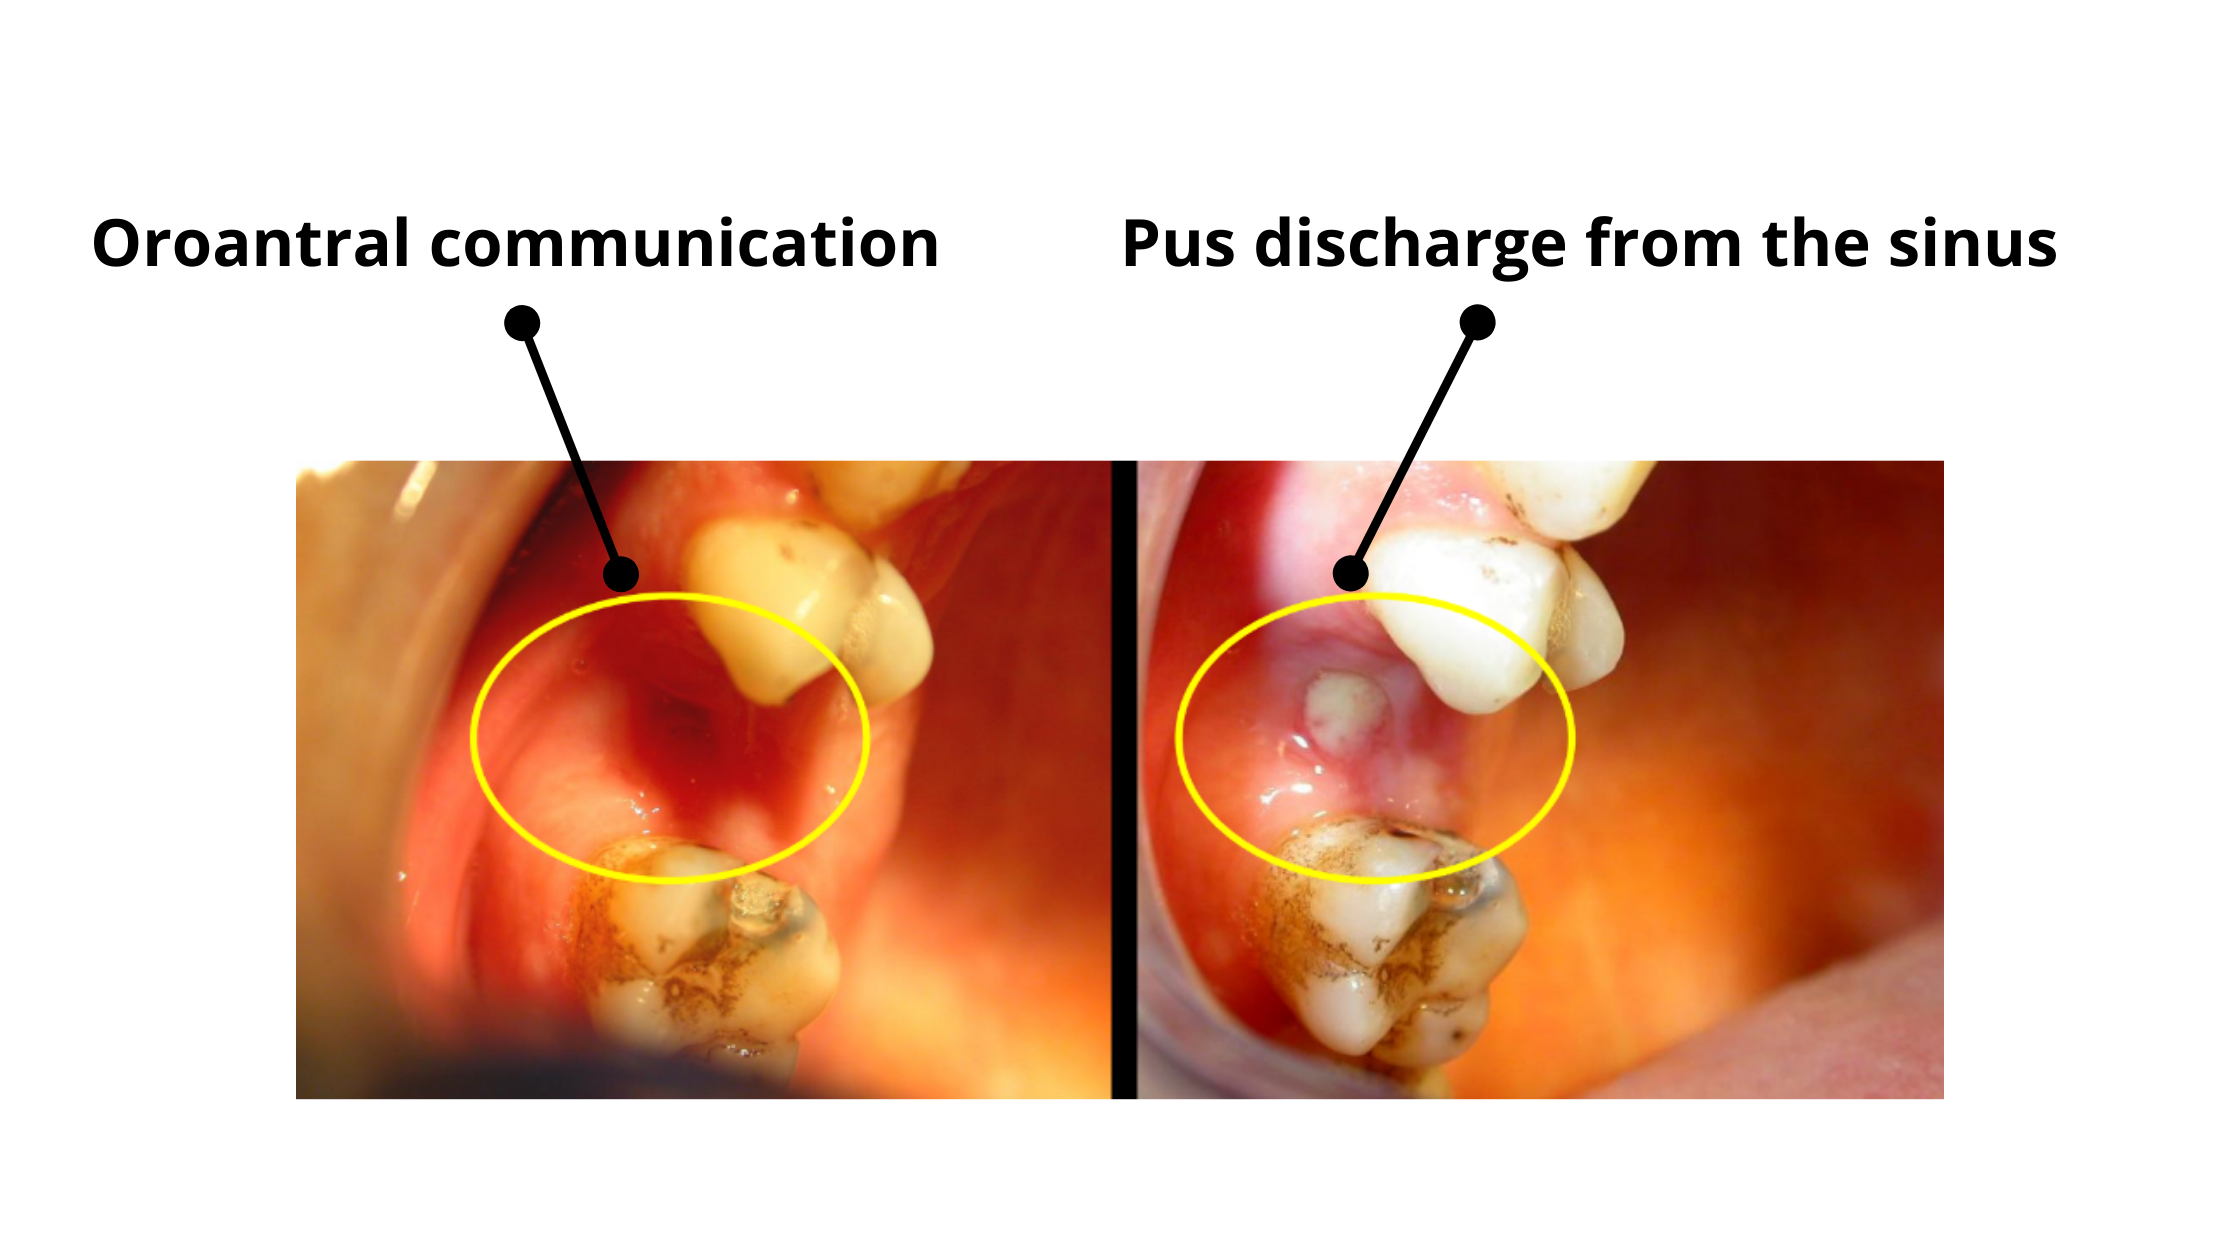 Clinical case of sinus infection after tooth extraction